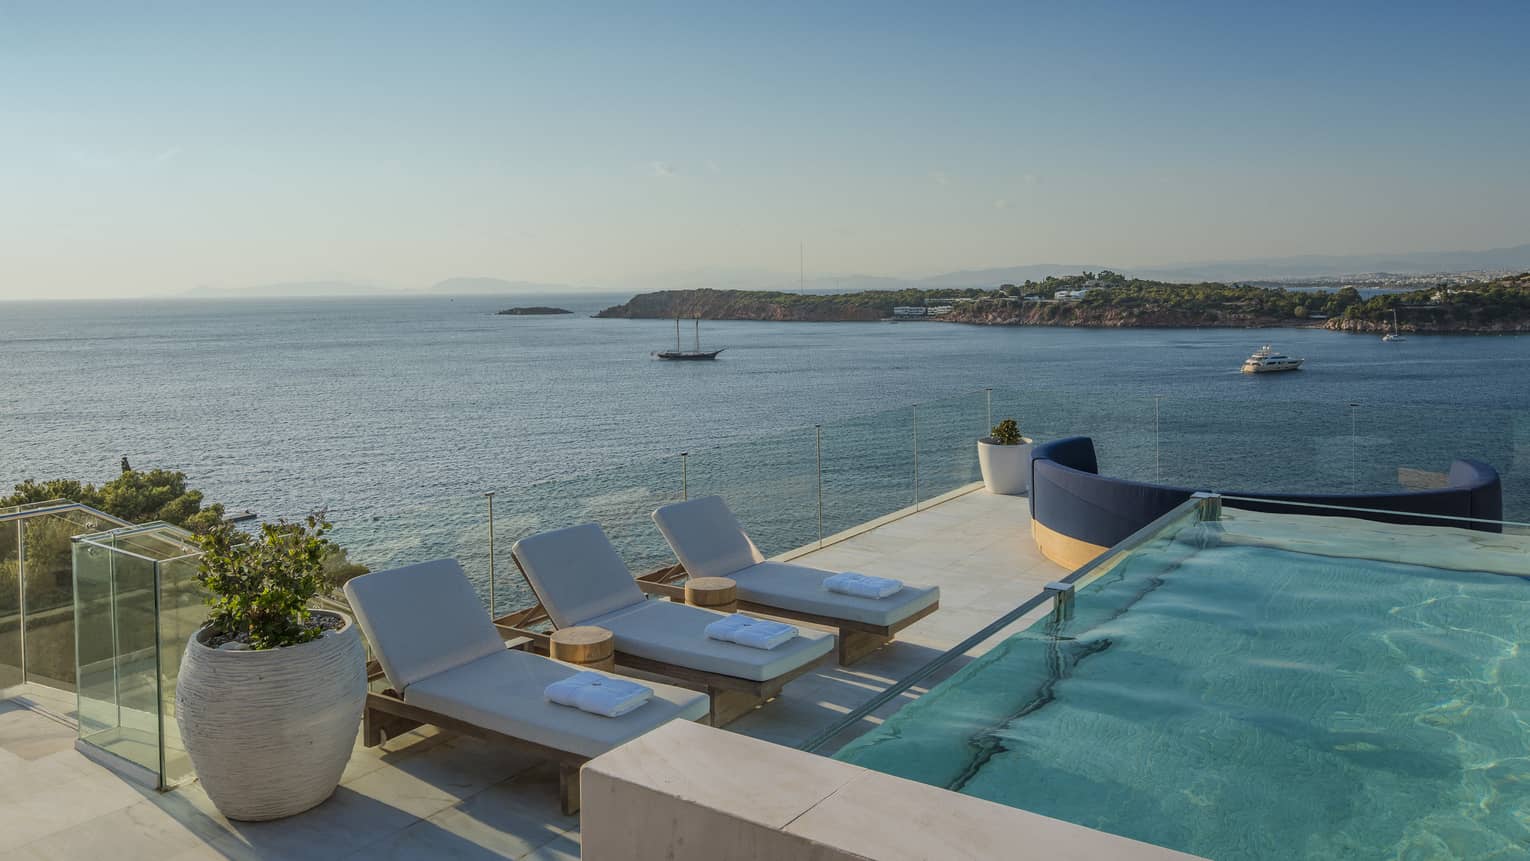 Arion Presidential Suite rooftoop with plunge pool, lounge chairs, boats on the Mediterranean in the background